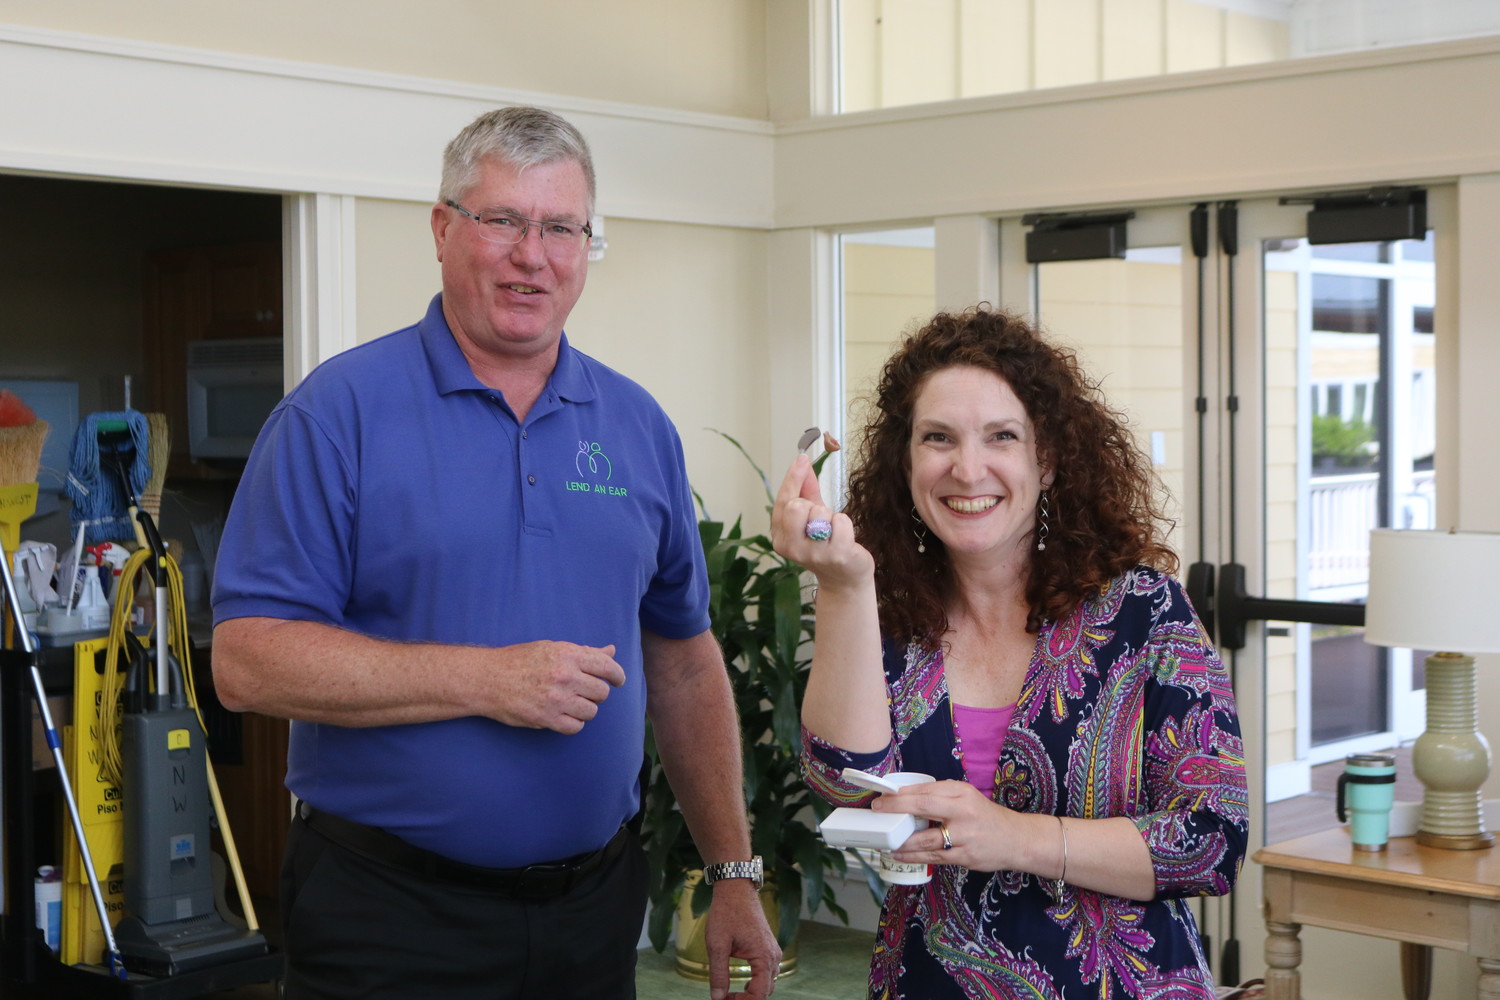 Sonia Howley of the St. Johns County School District celebrates as she receives the donated hearing aids from Lend an Ear Outreach Executive Director Scott Hetzinger.